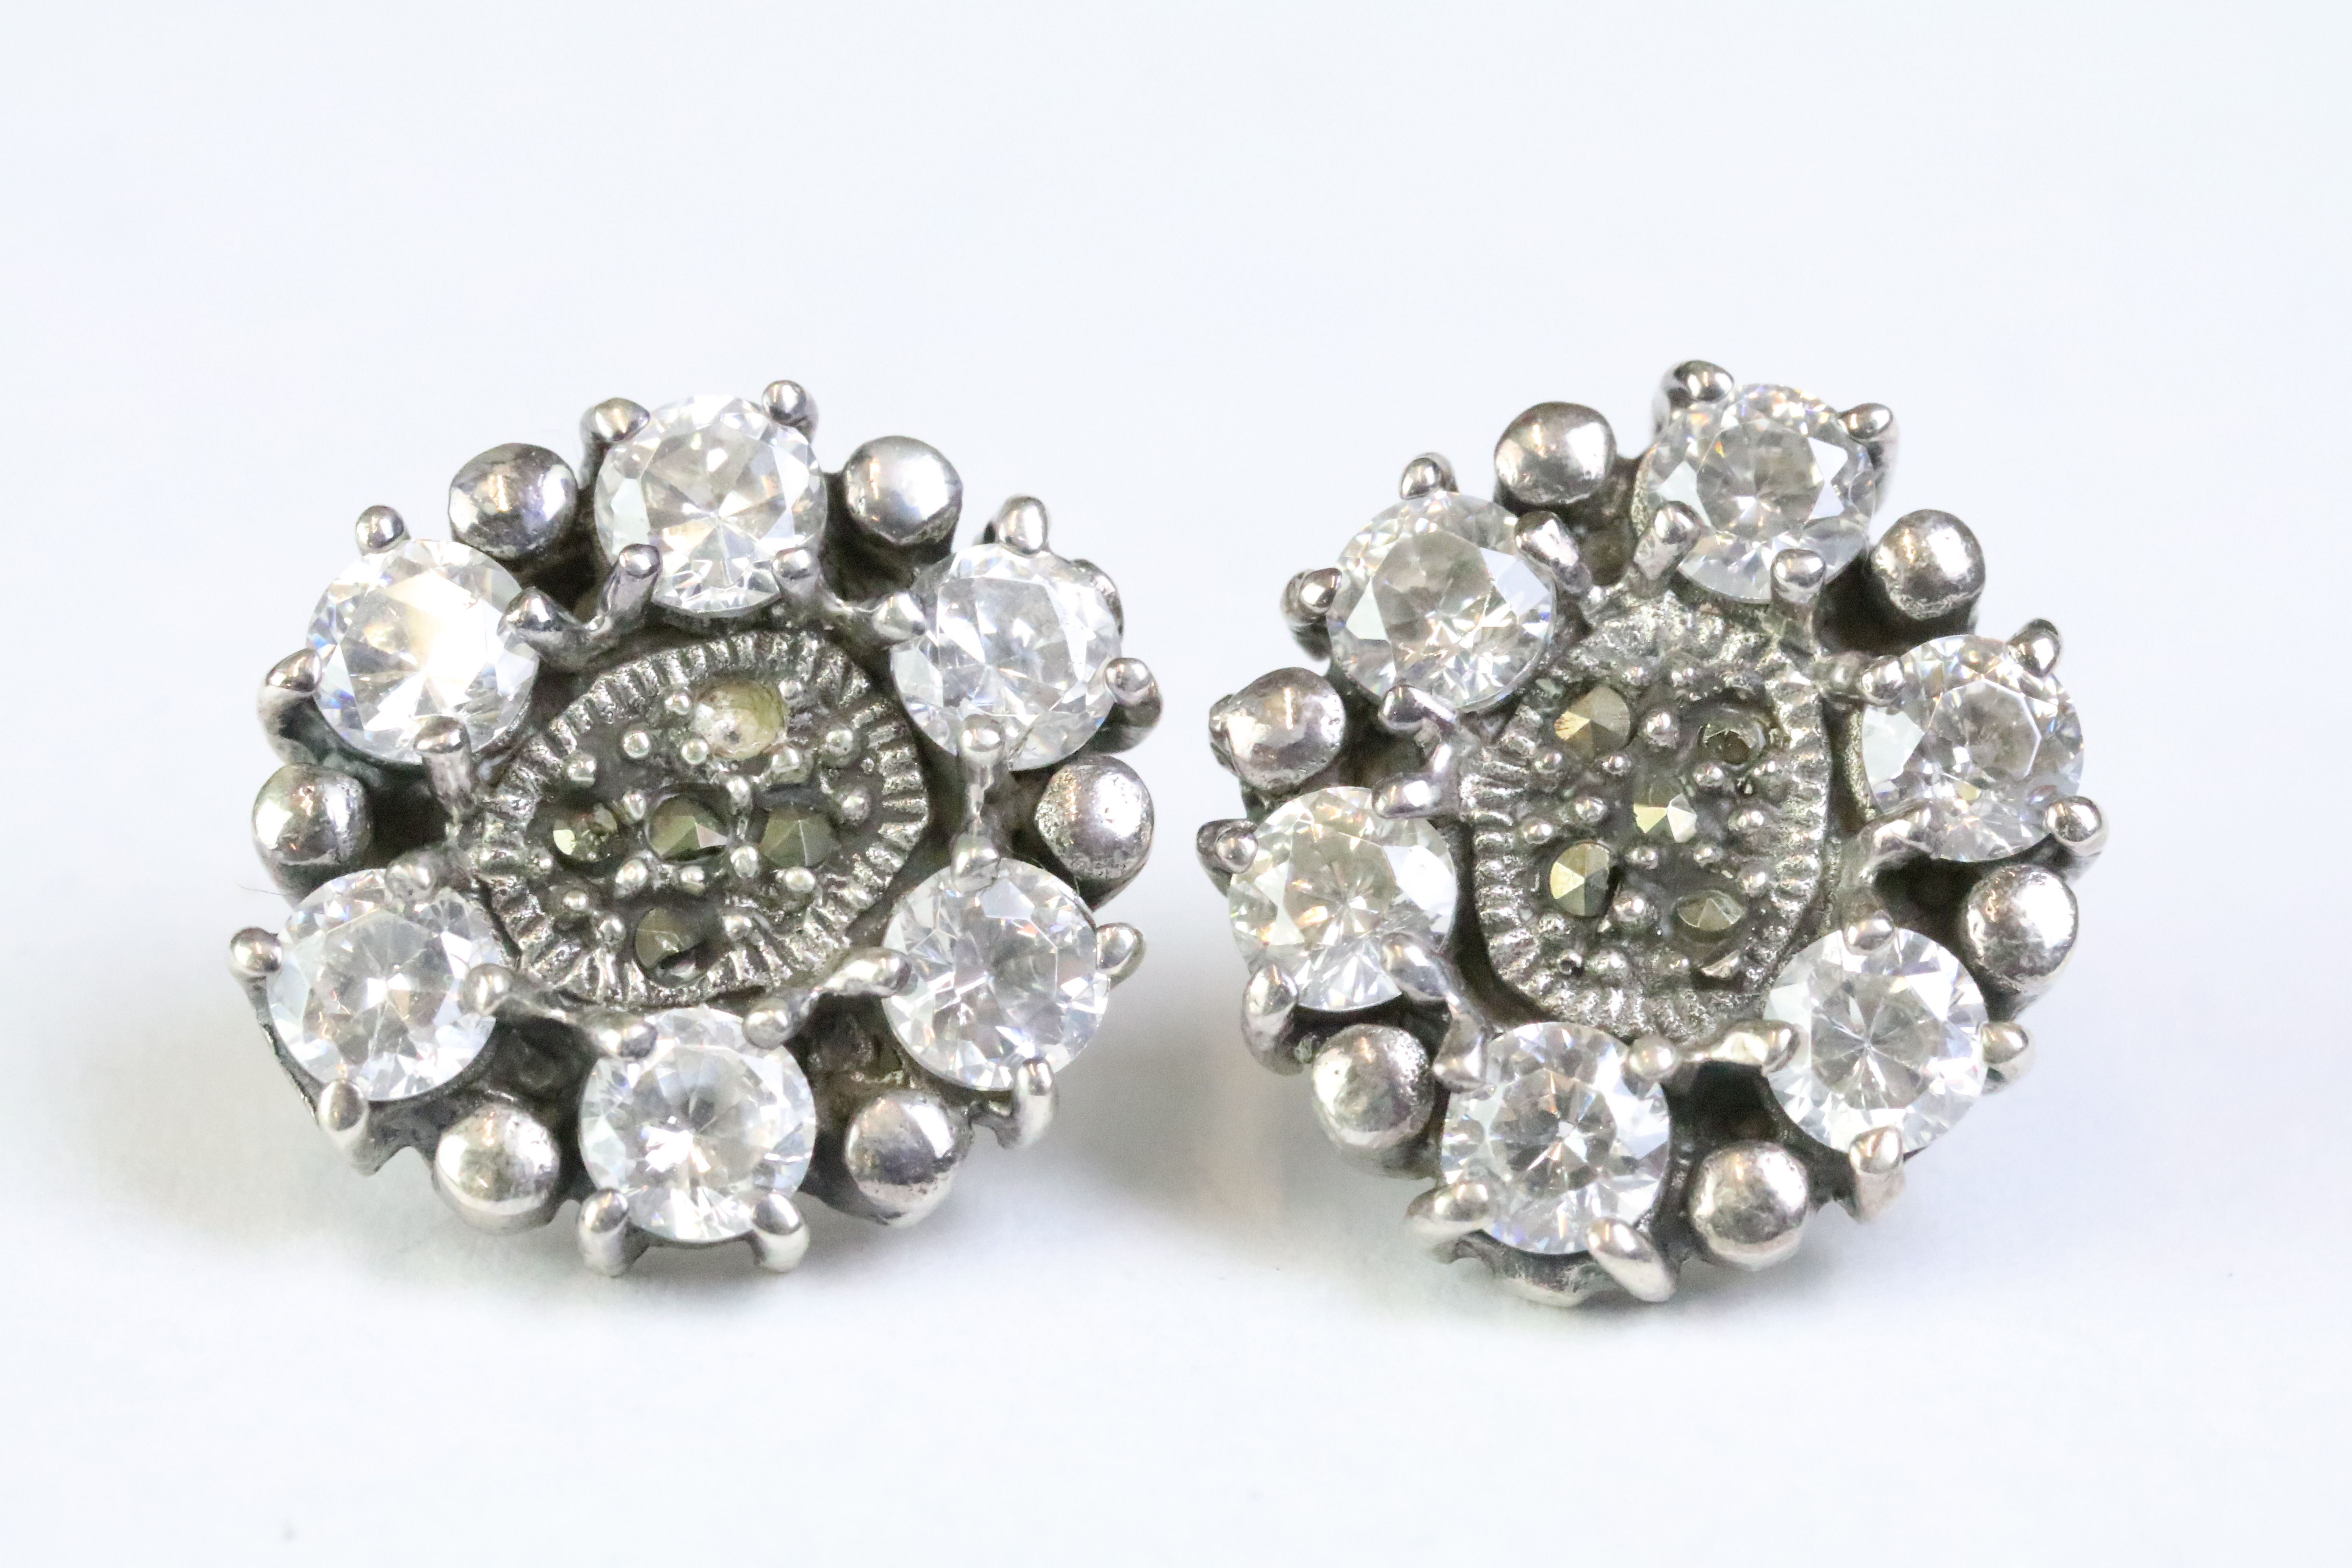 Pair of silver and CZ stud earrings - Image 2 of 3